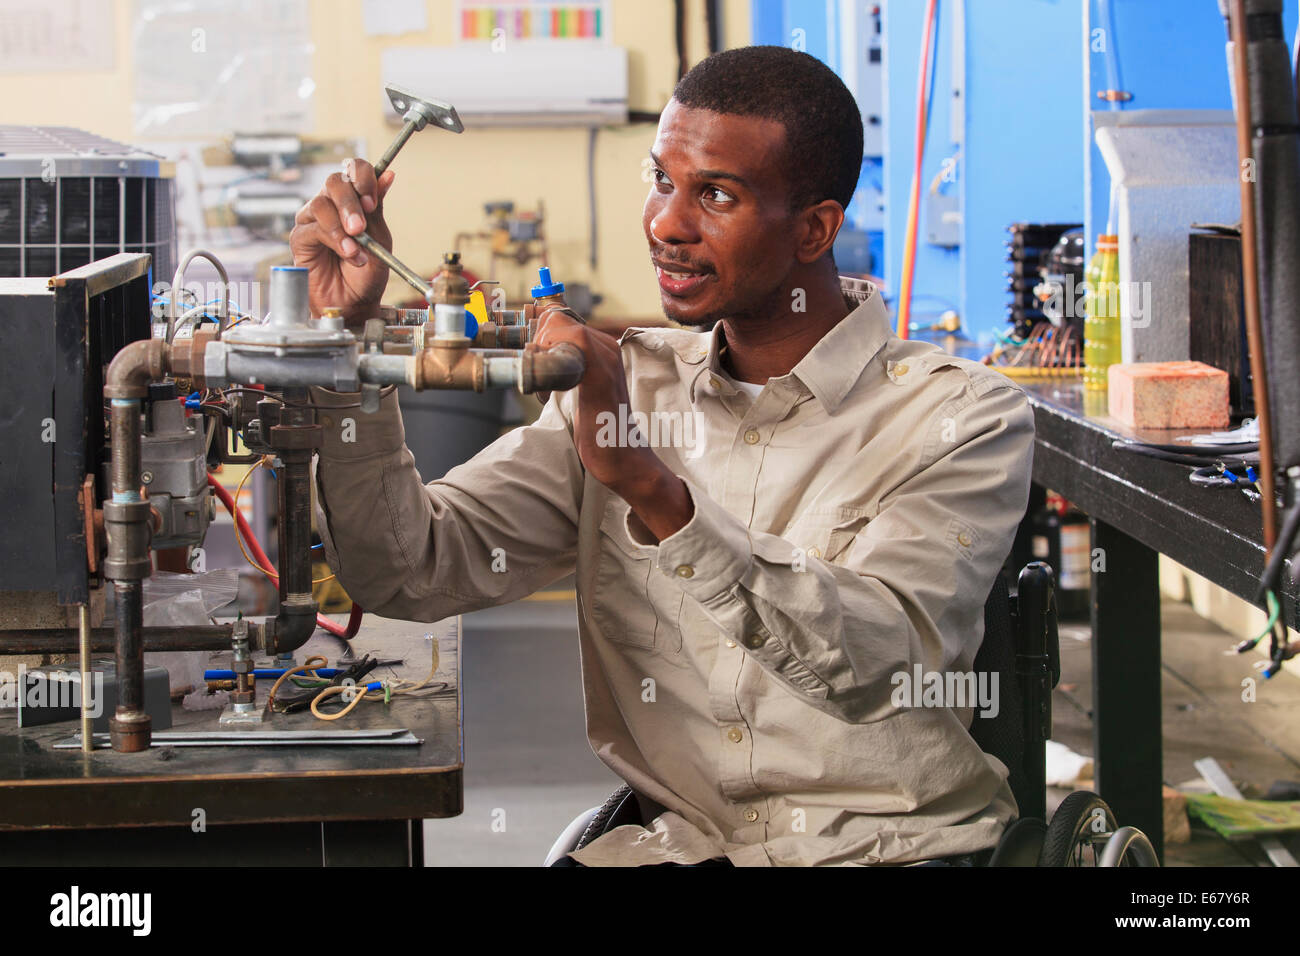 Student in wheelchair examining furnace ignitor in HVAC classroom Stock Photo